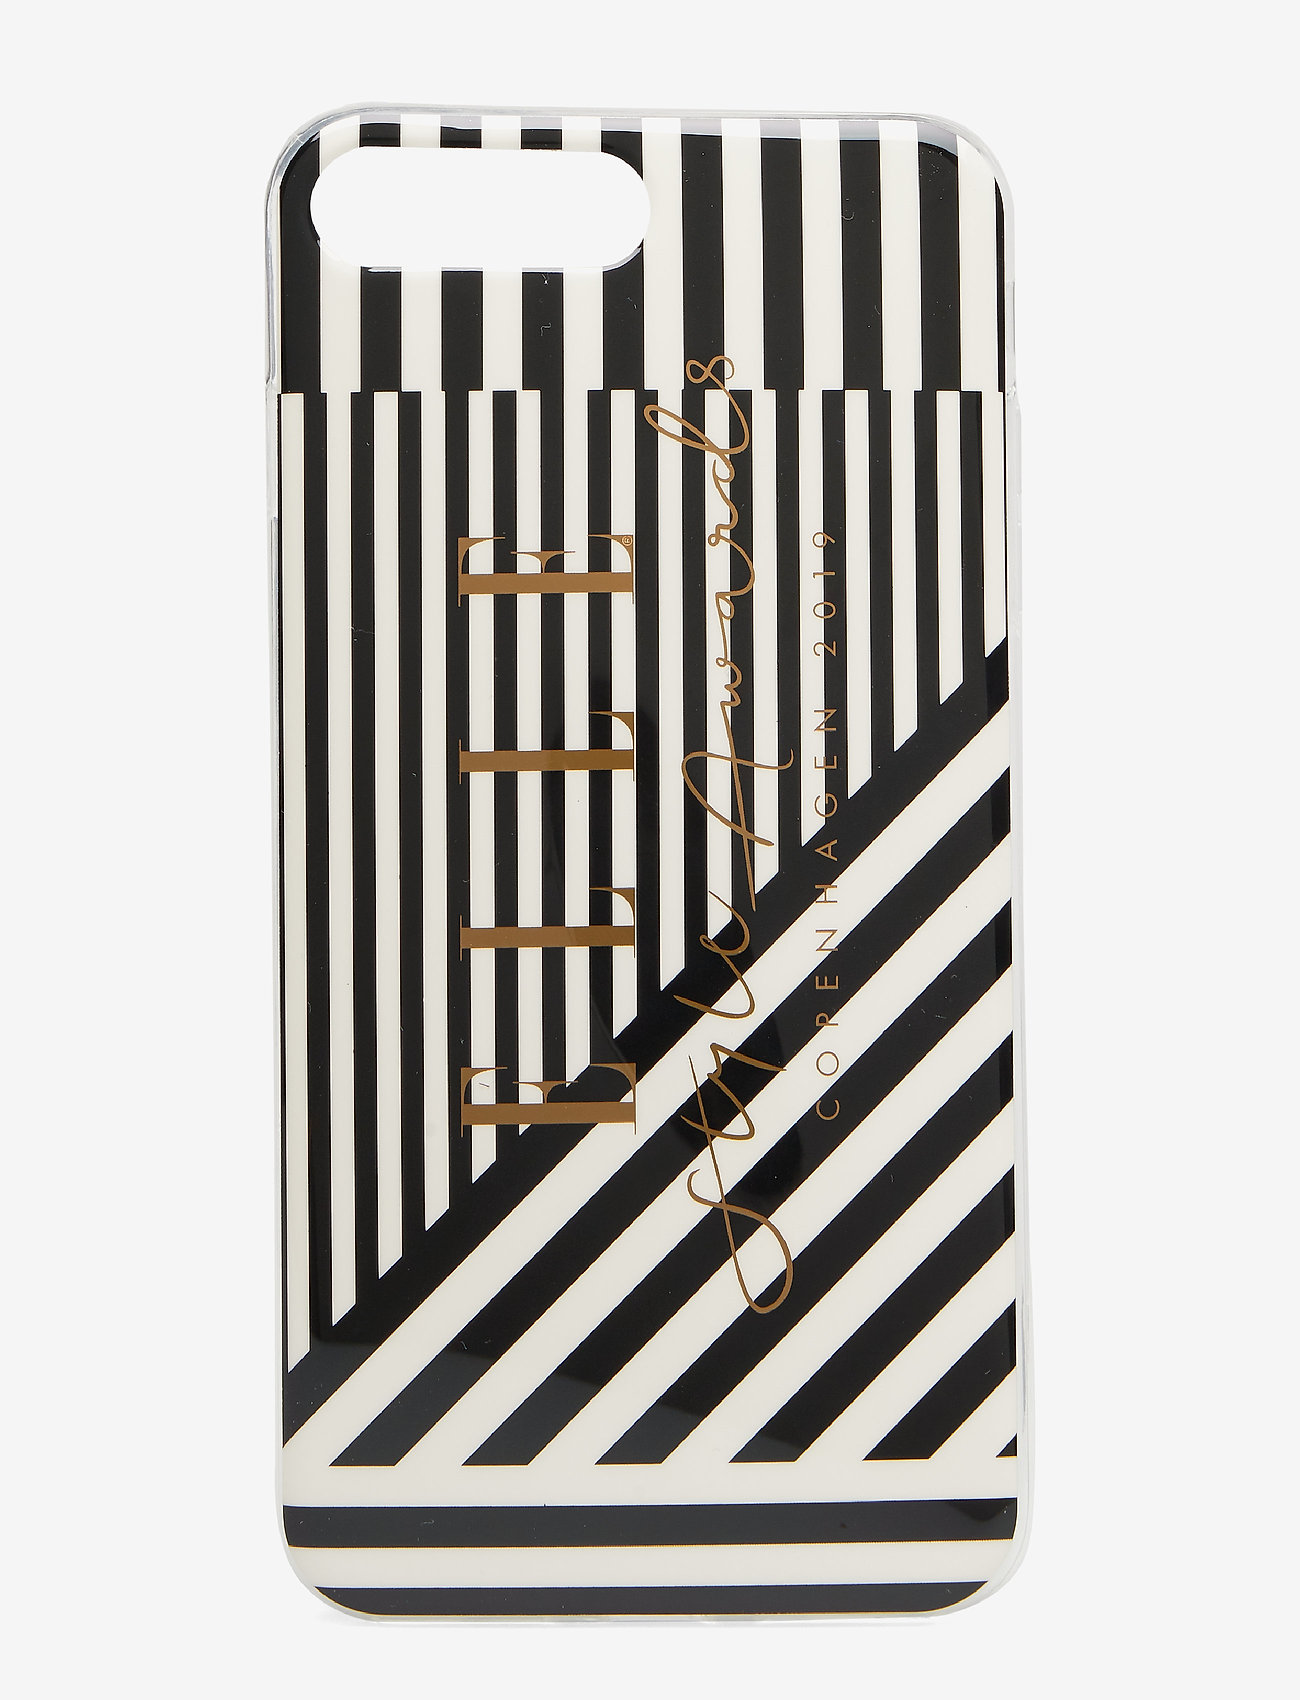 Elle Style Awards Collection 2019 - iPhone Cover - alhaisimmat hinnat - black - 0